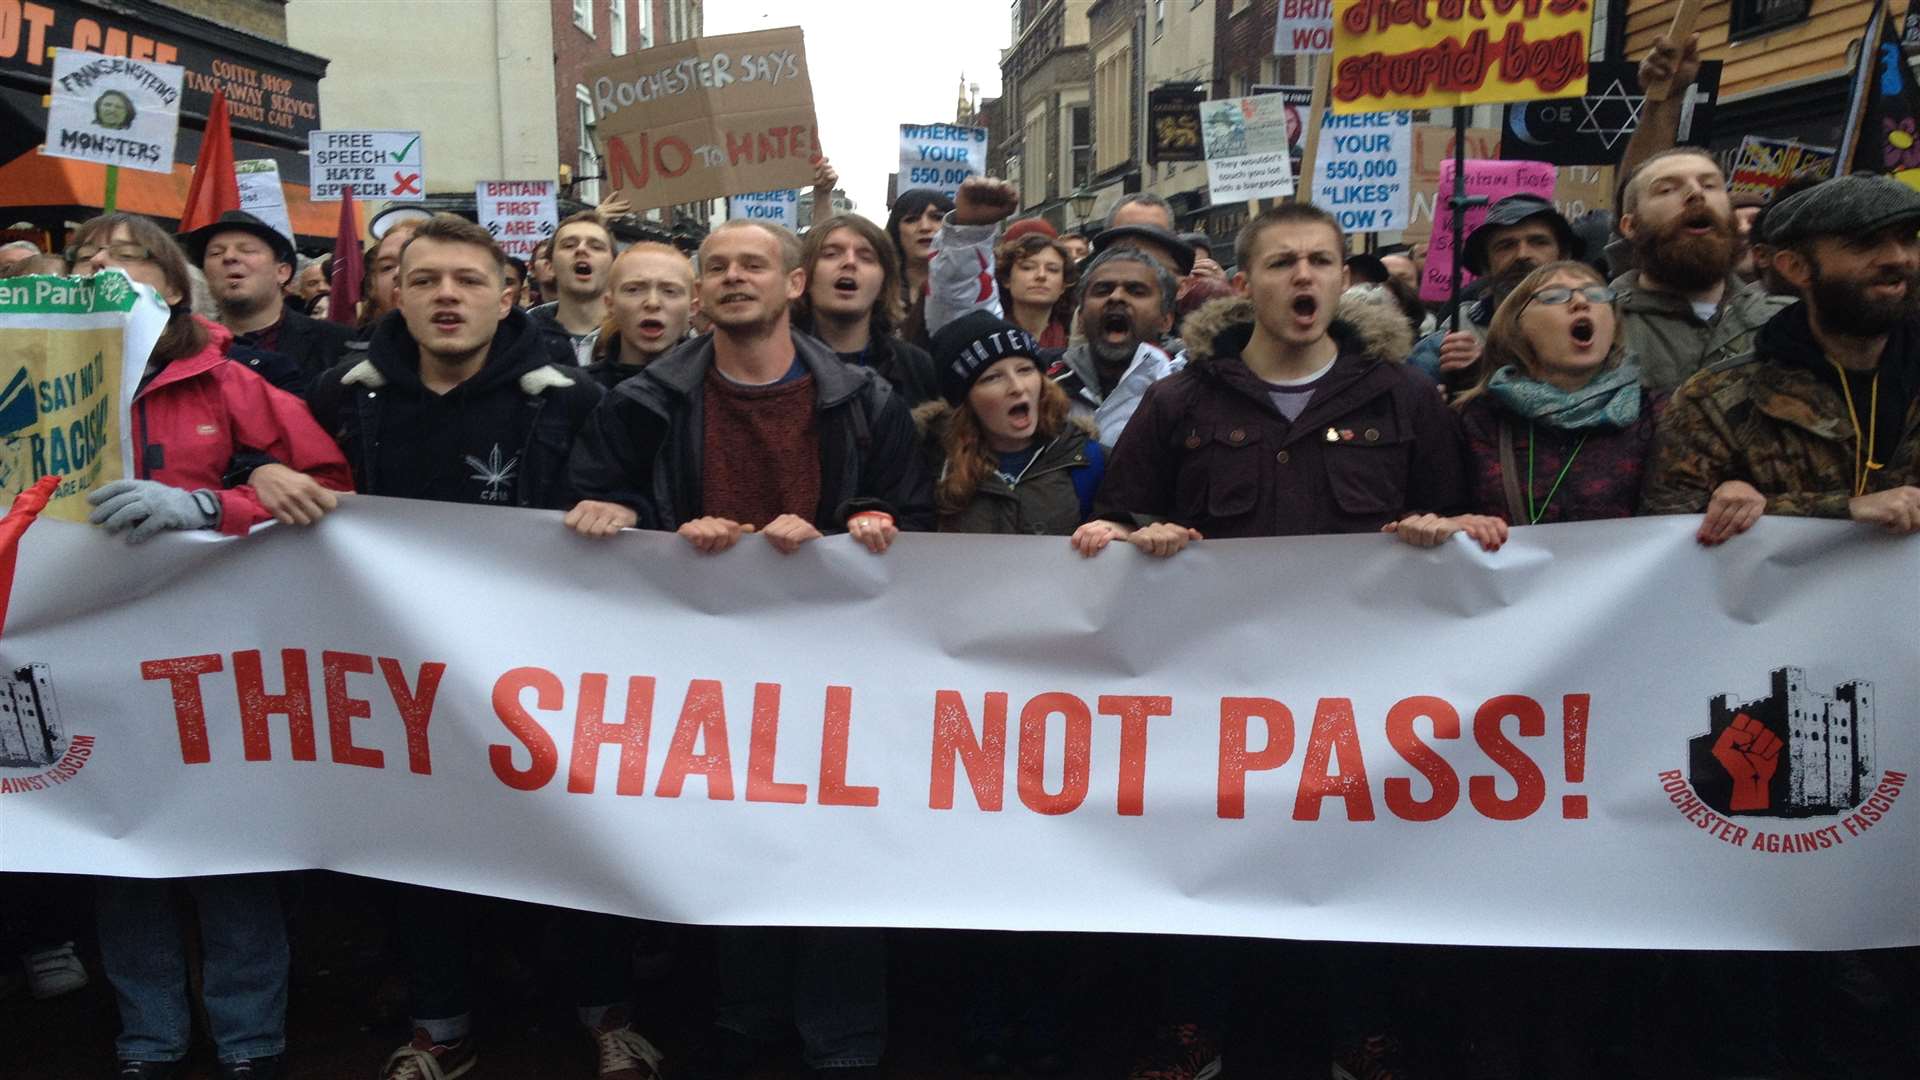 Britain First were met with a strong anti fascist contingent when they tried to march through Rochester